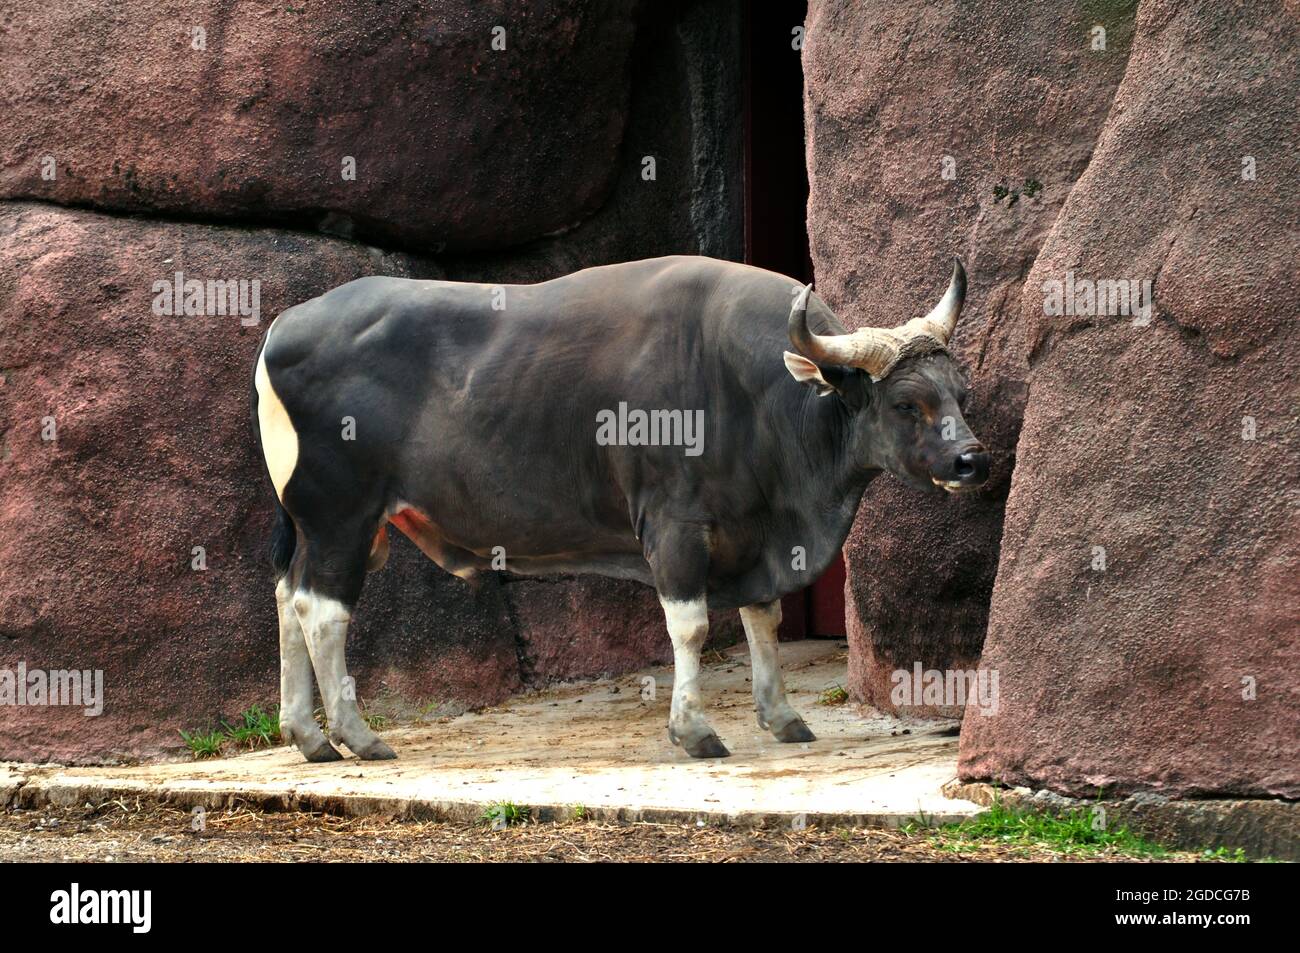 Black and white water buffalo stands in a rock wall Photo - Alamy